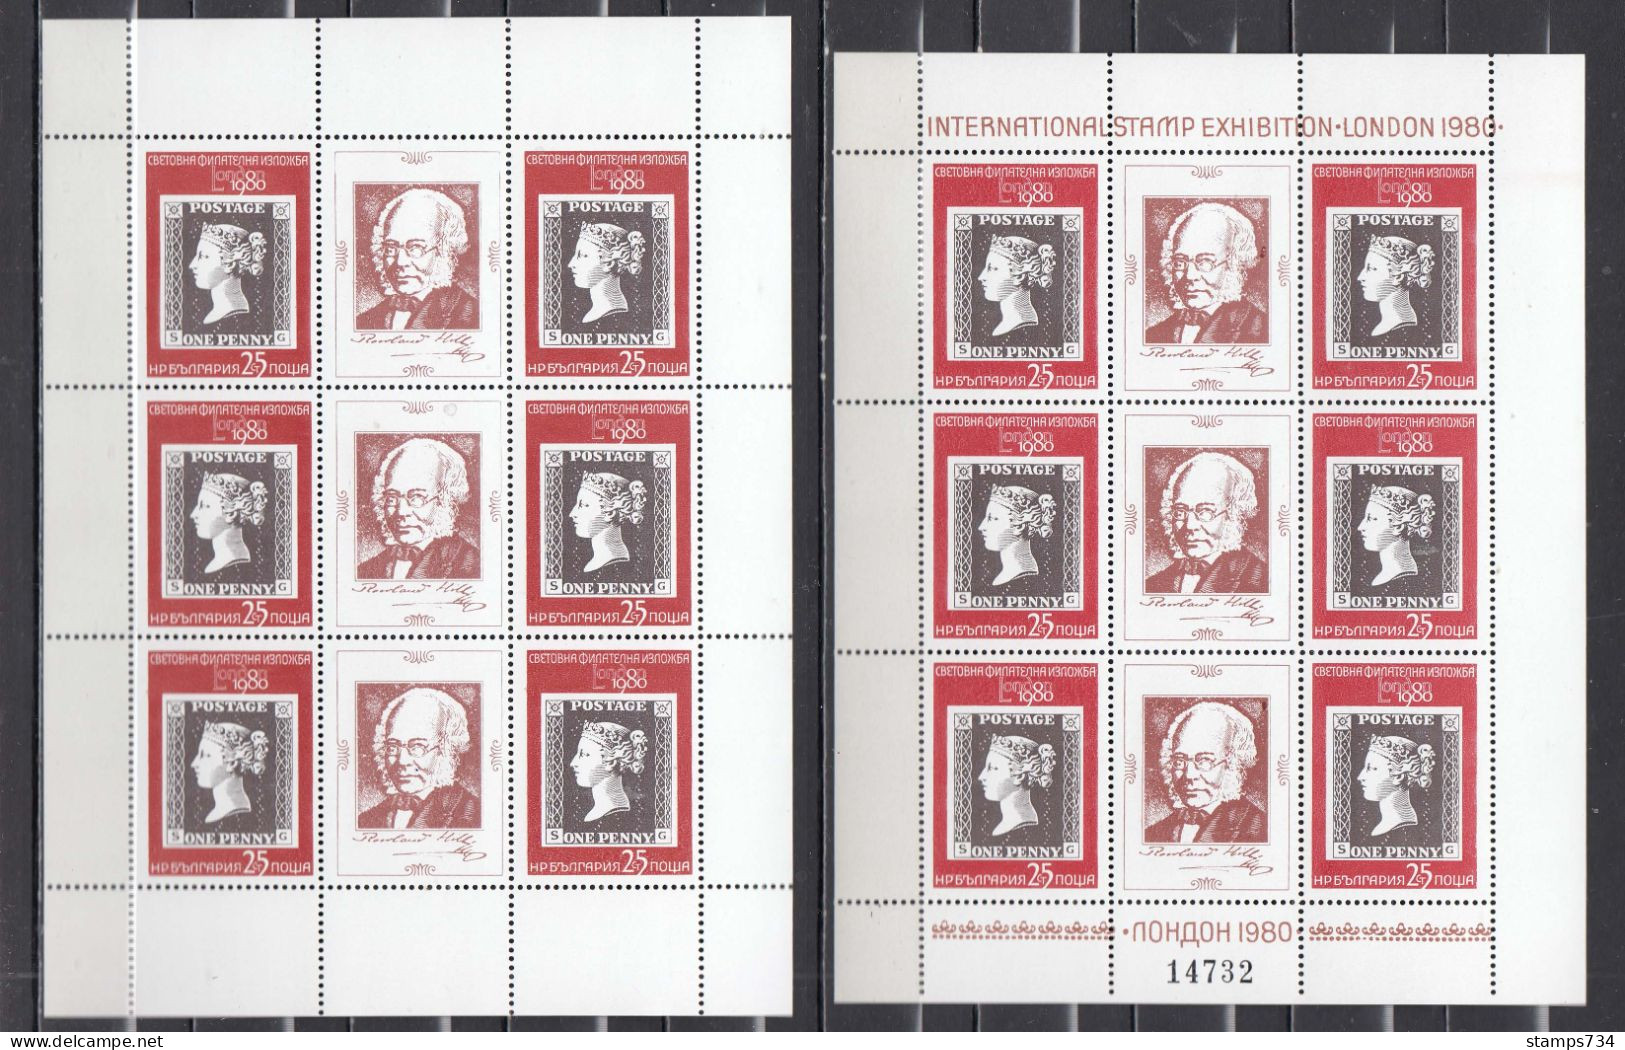 Bulgaria 1980 - International Stamp Exhibition LONDON'1980, Mi-Nr. 2886Zf In Sheet (1+2), Used - Used Stamps